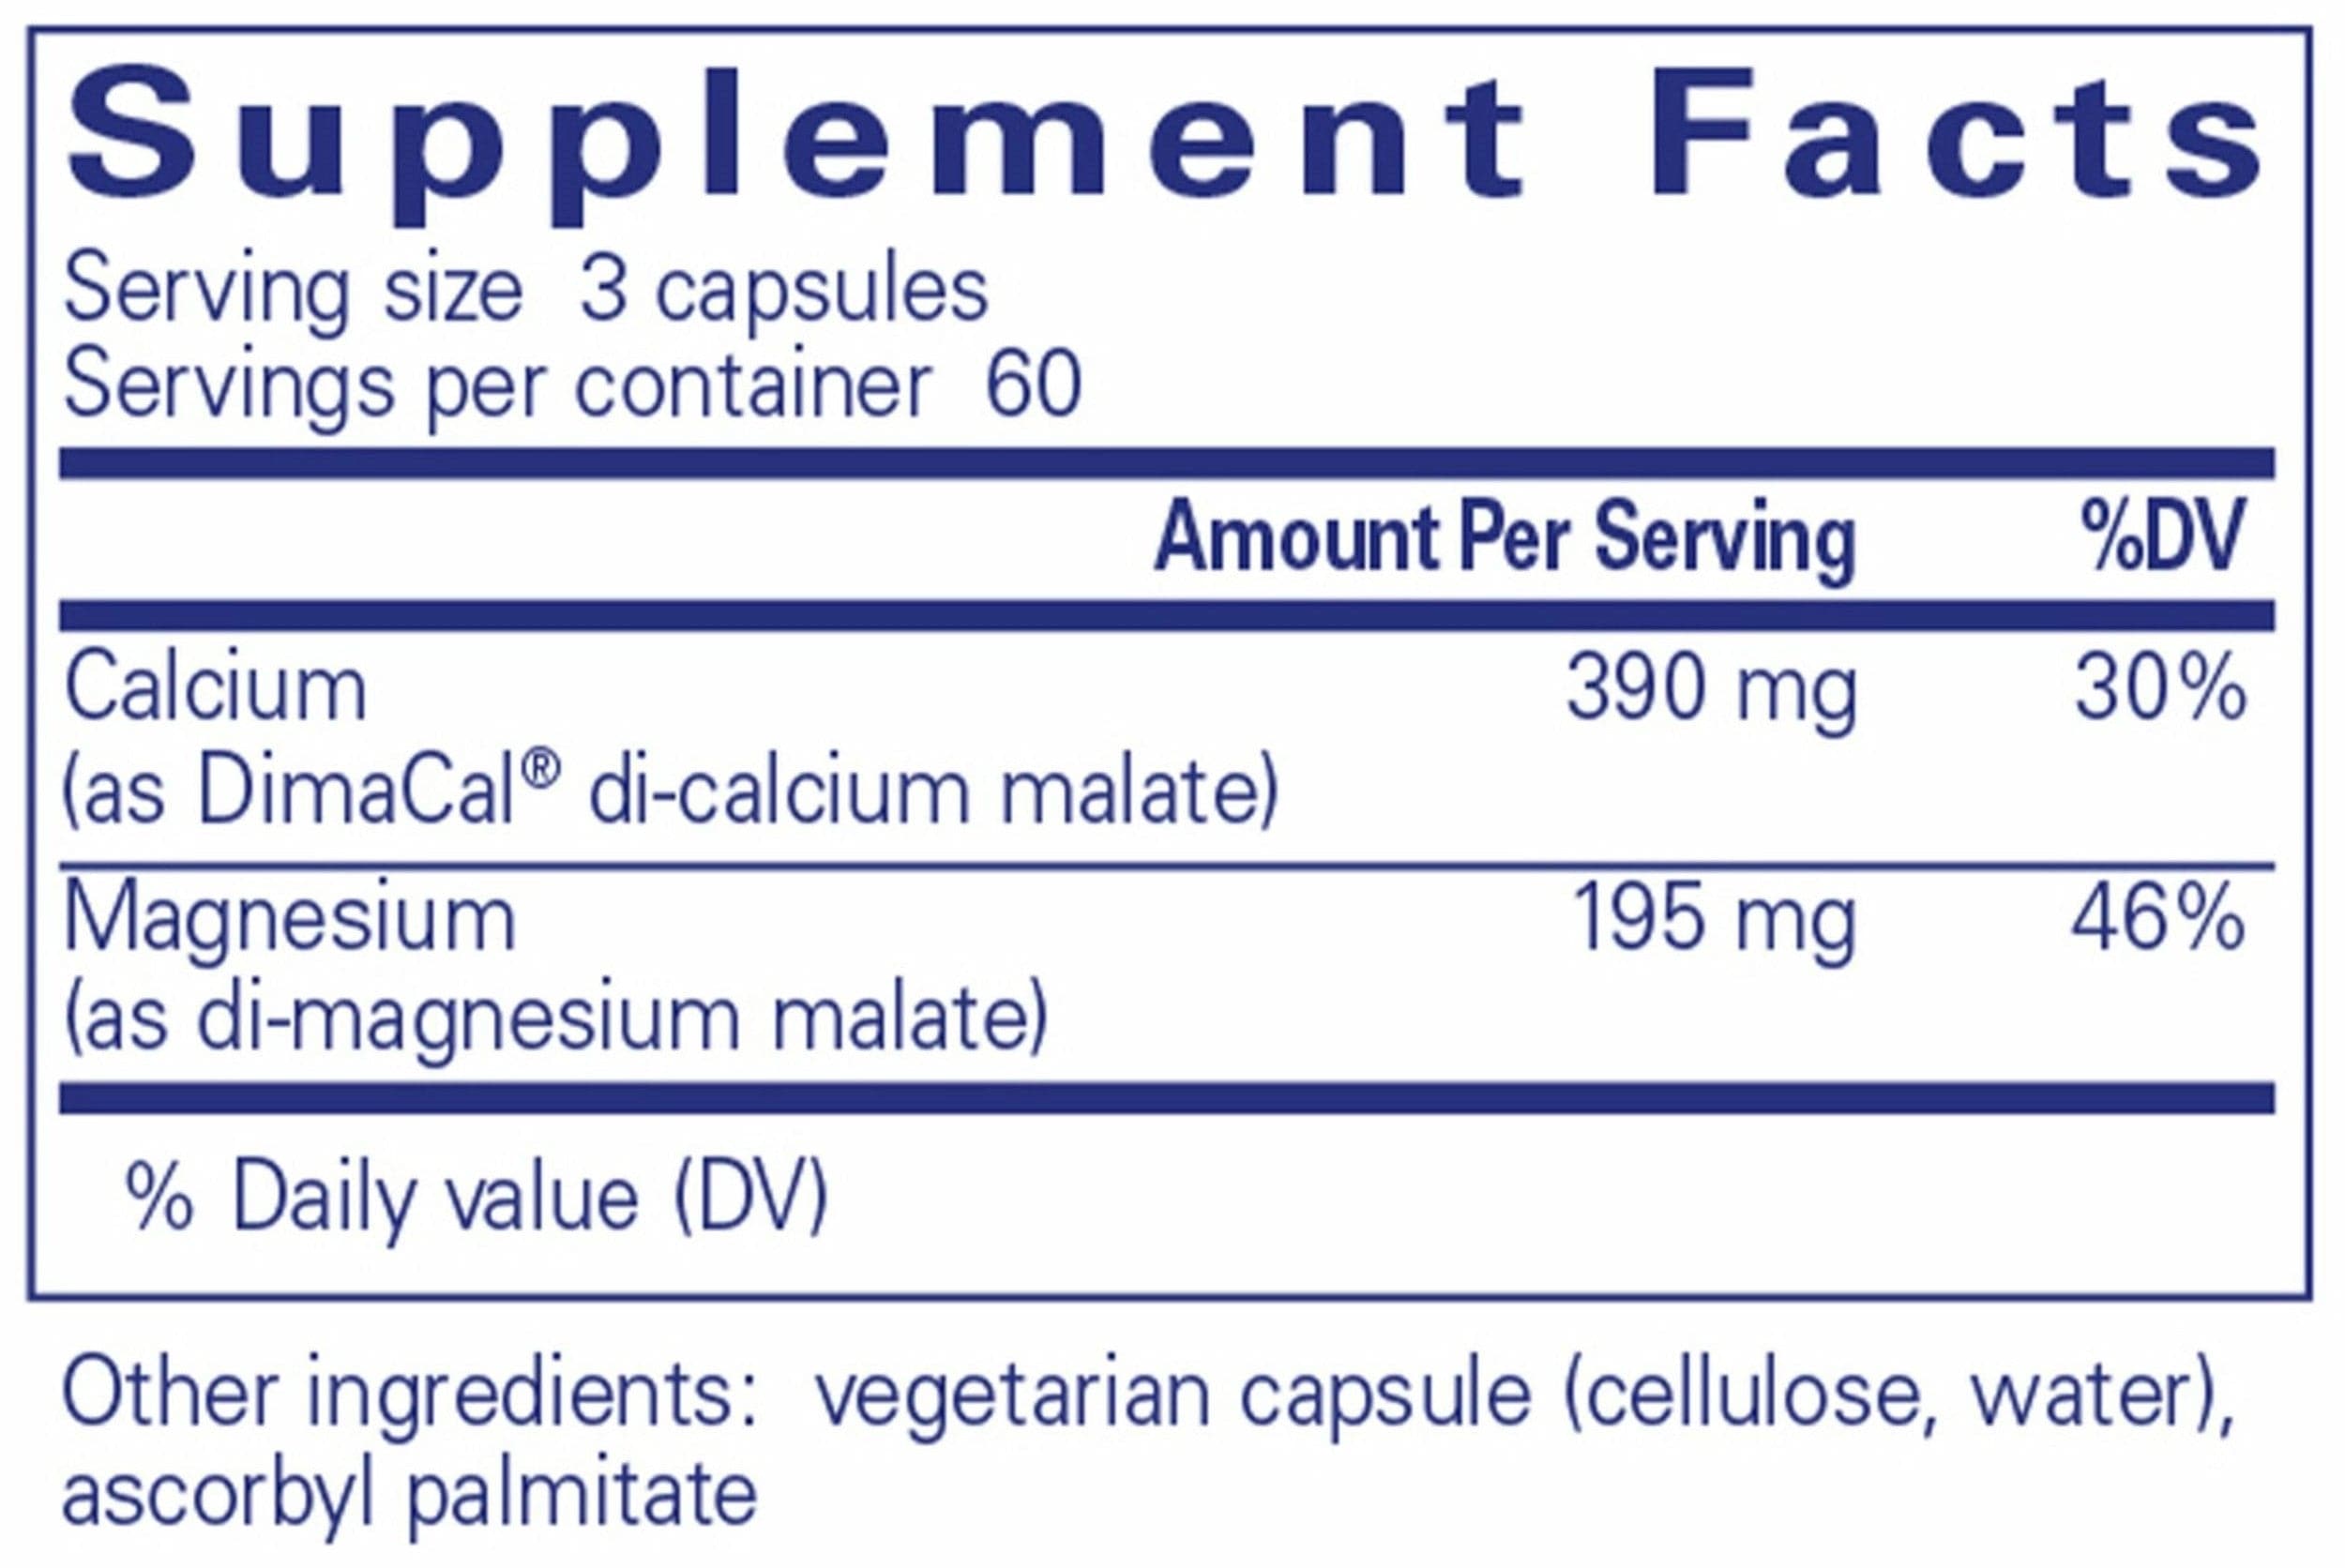 Pure Encapsulations Cal/Mag 2:1 (malate) Ingredients 